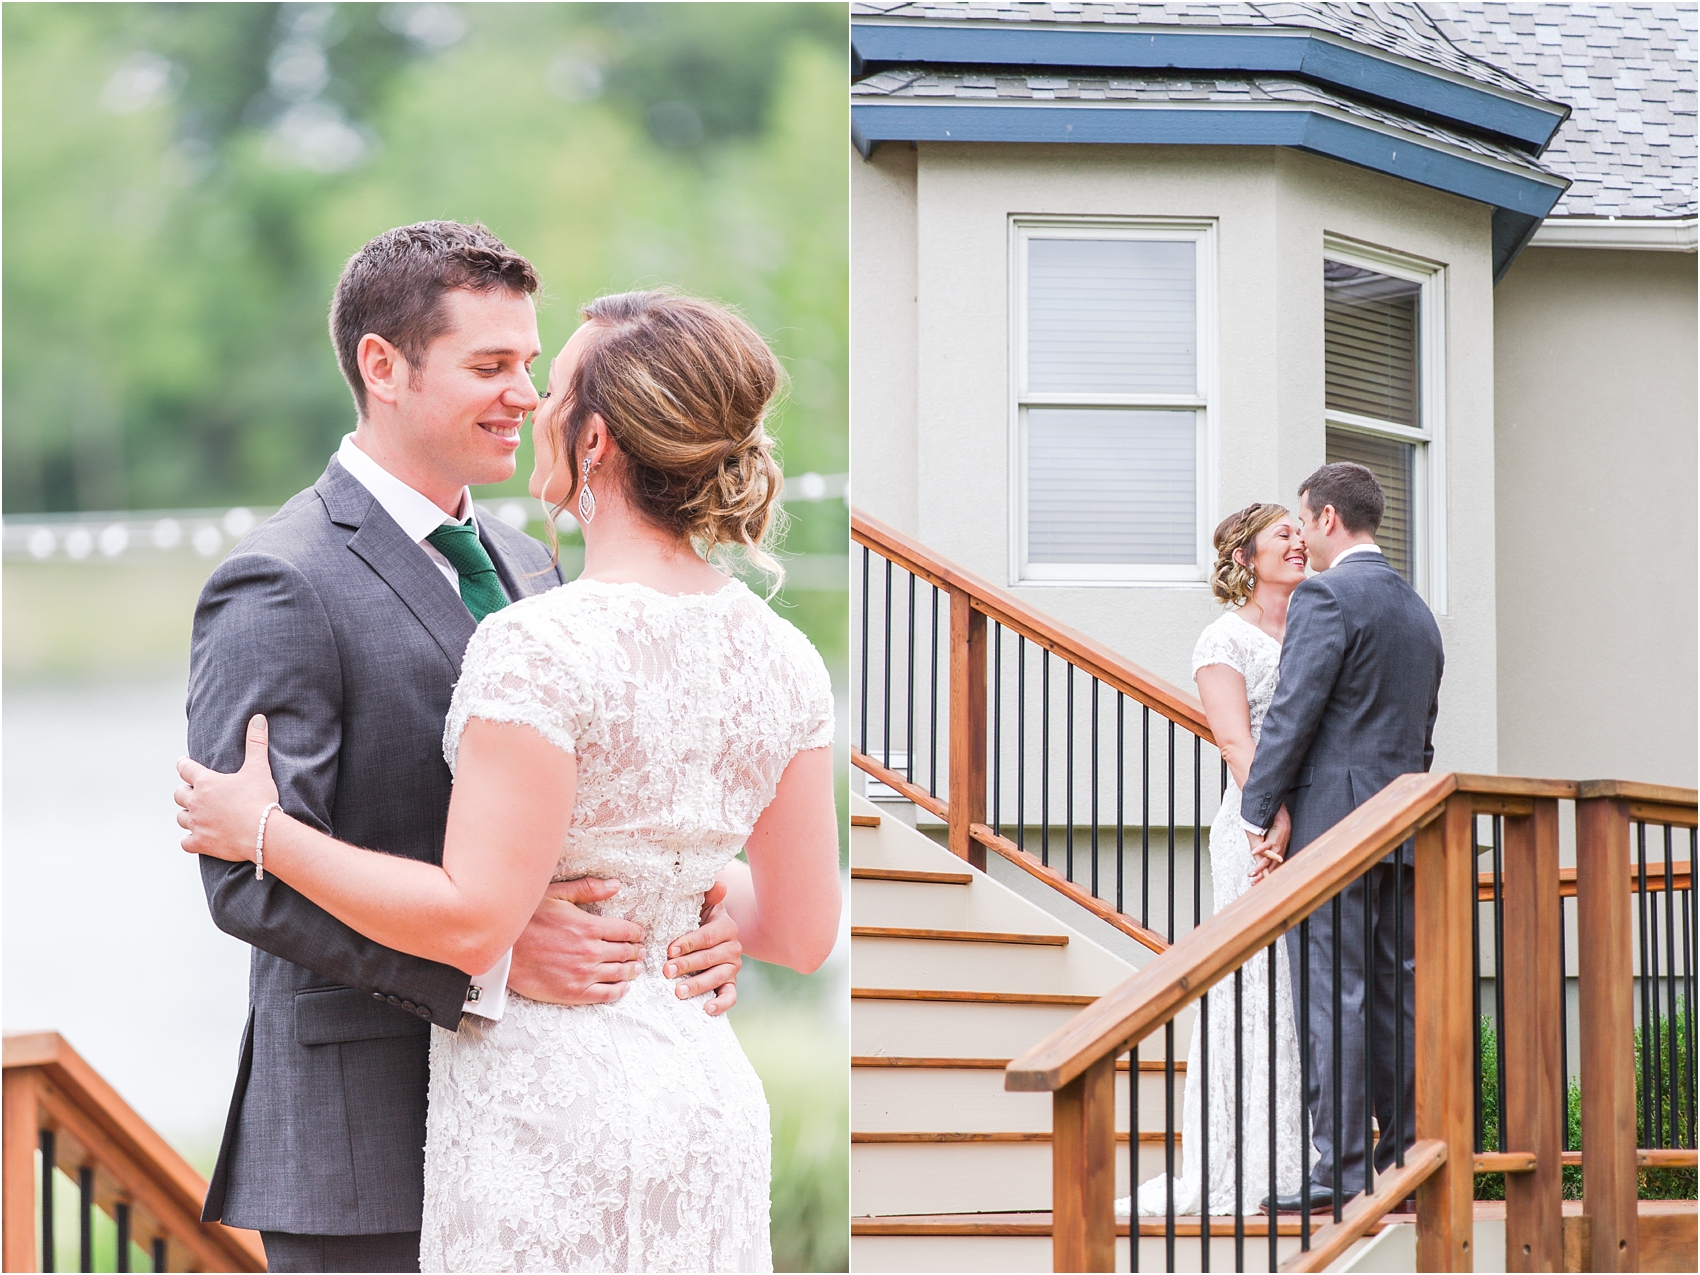 romantic-intimate-backyard-wedding-photos-at-private-estate-in-ann-arbor-mi-by-courtney-carolyn-photography_0029.jpg